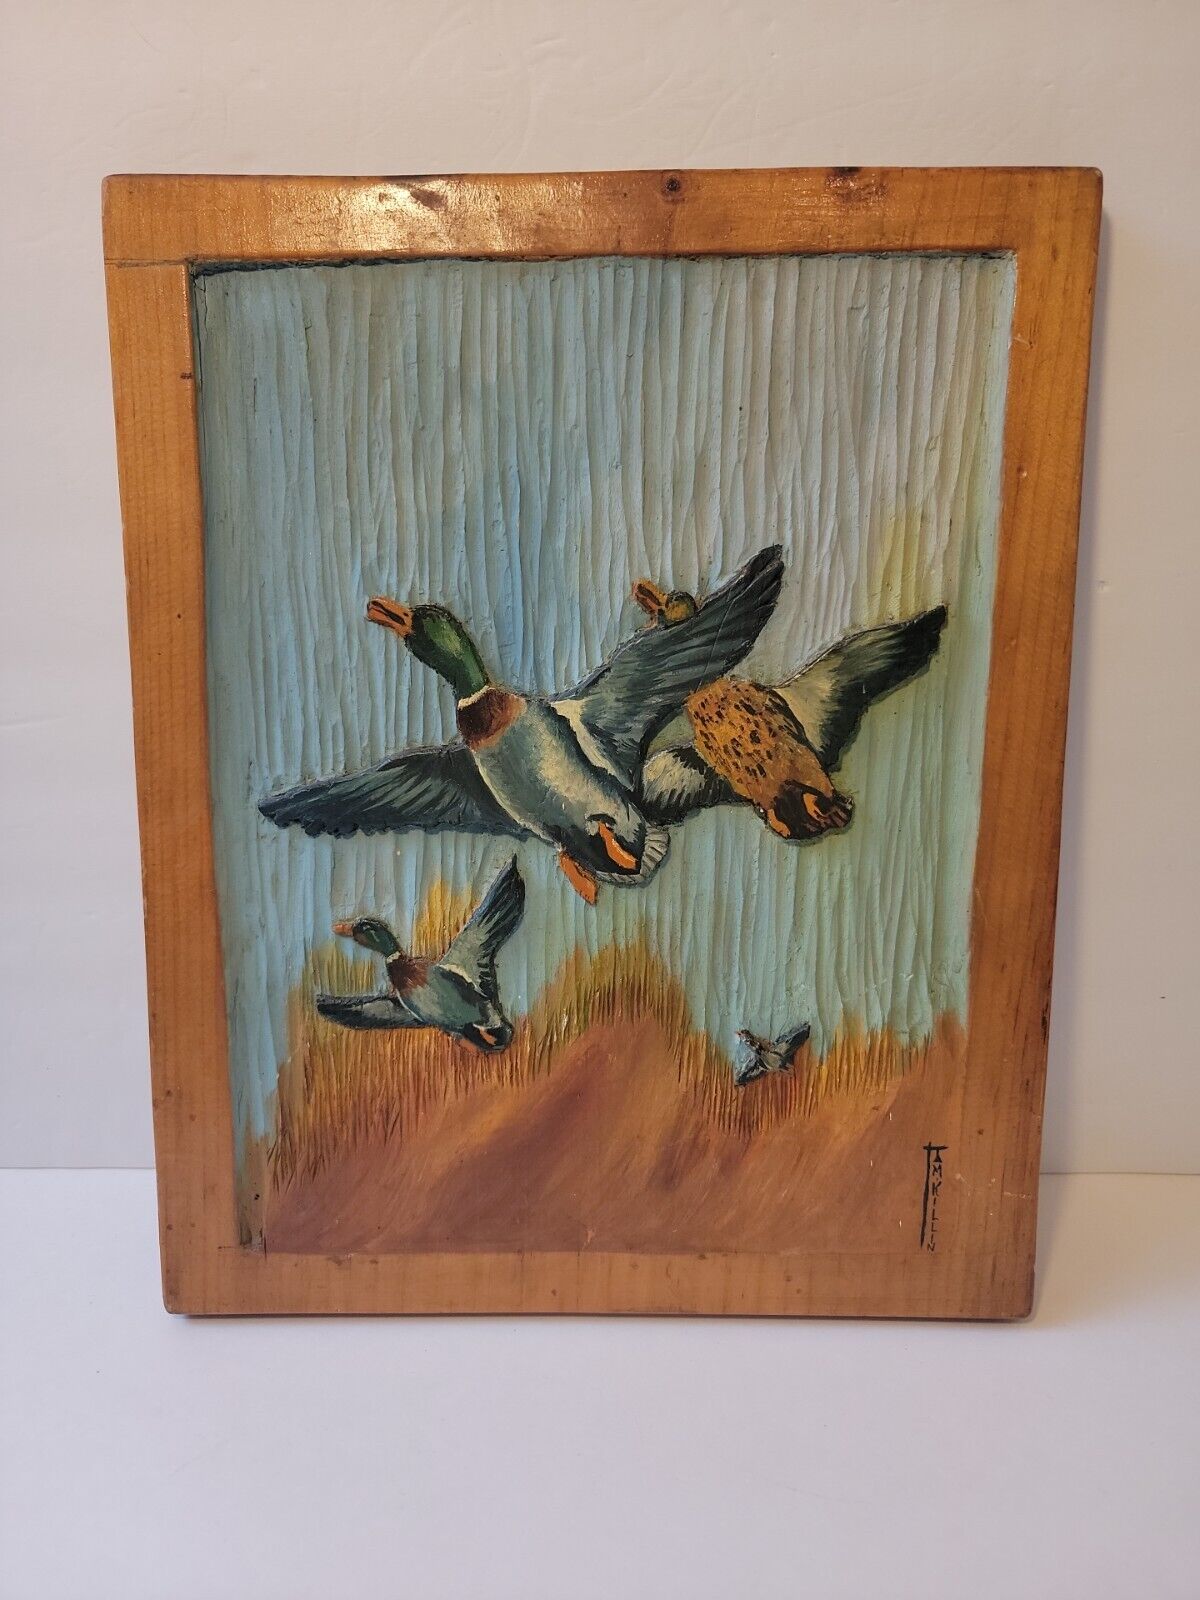 Handcrafted Wood Wall Art Ducks Flying Birds Framed Painted 15\